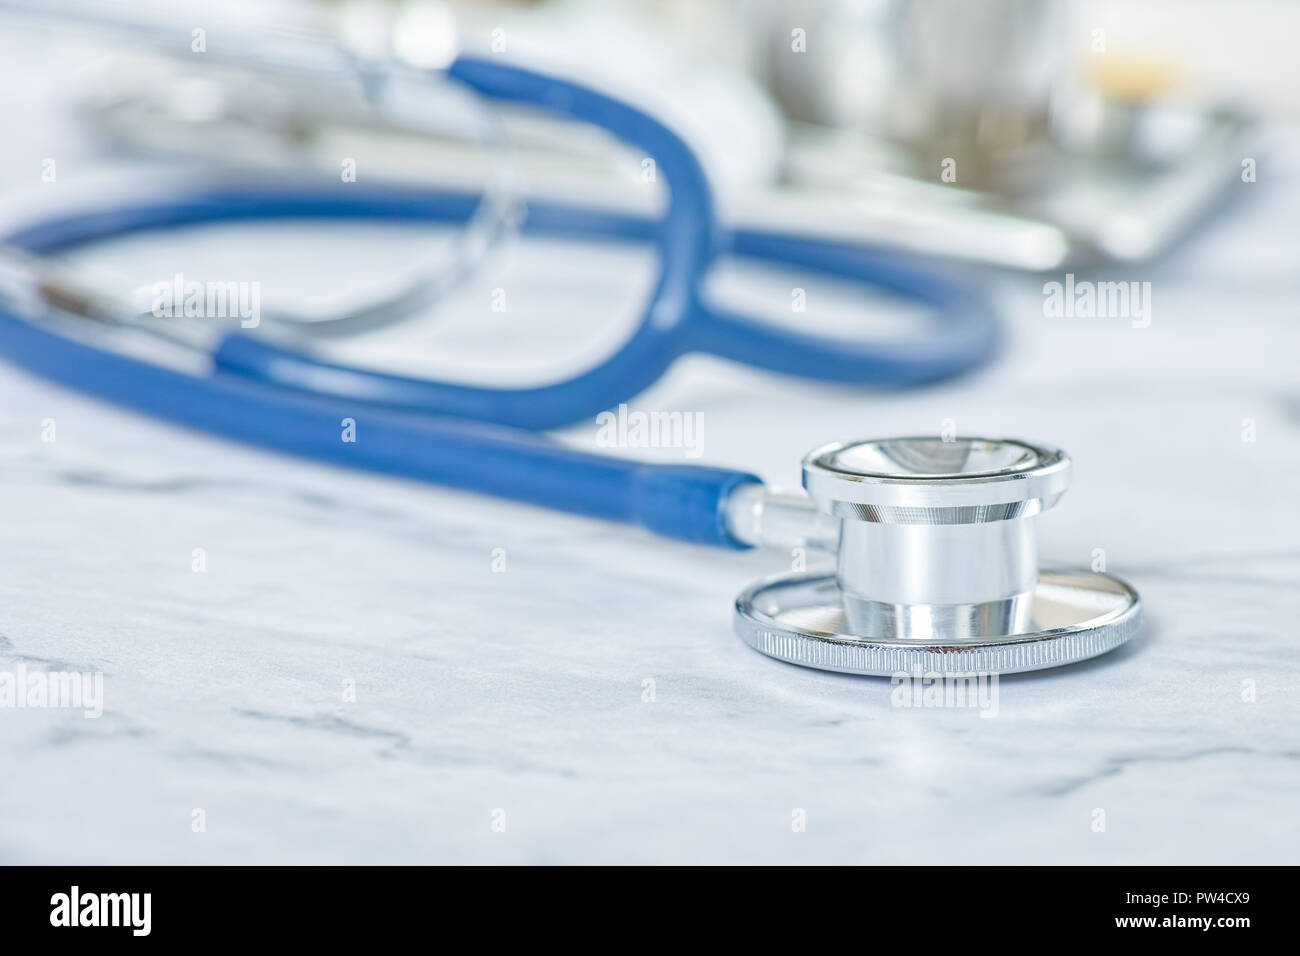 Stethoscope on doctor work park table close up for healthcare diagnosis concept background Stock Photo